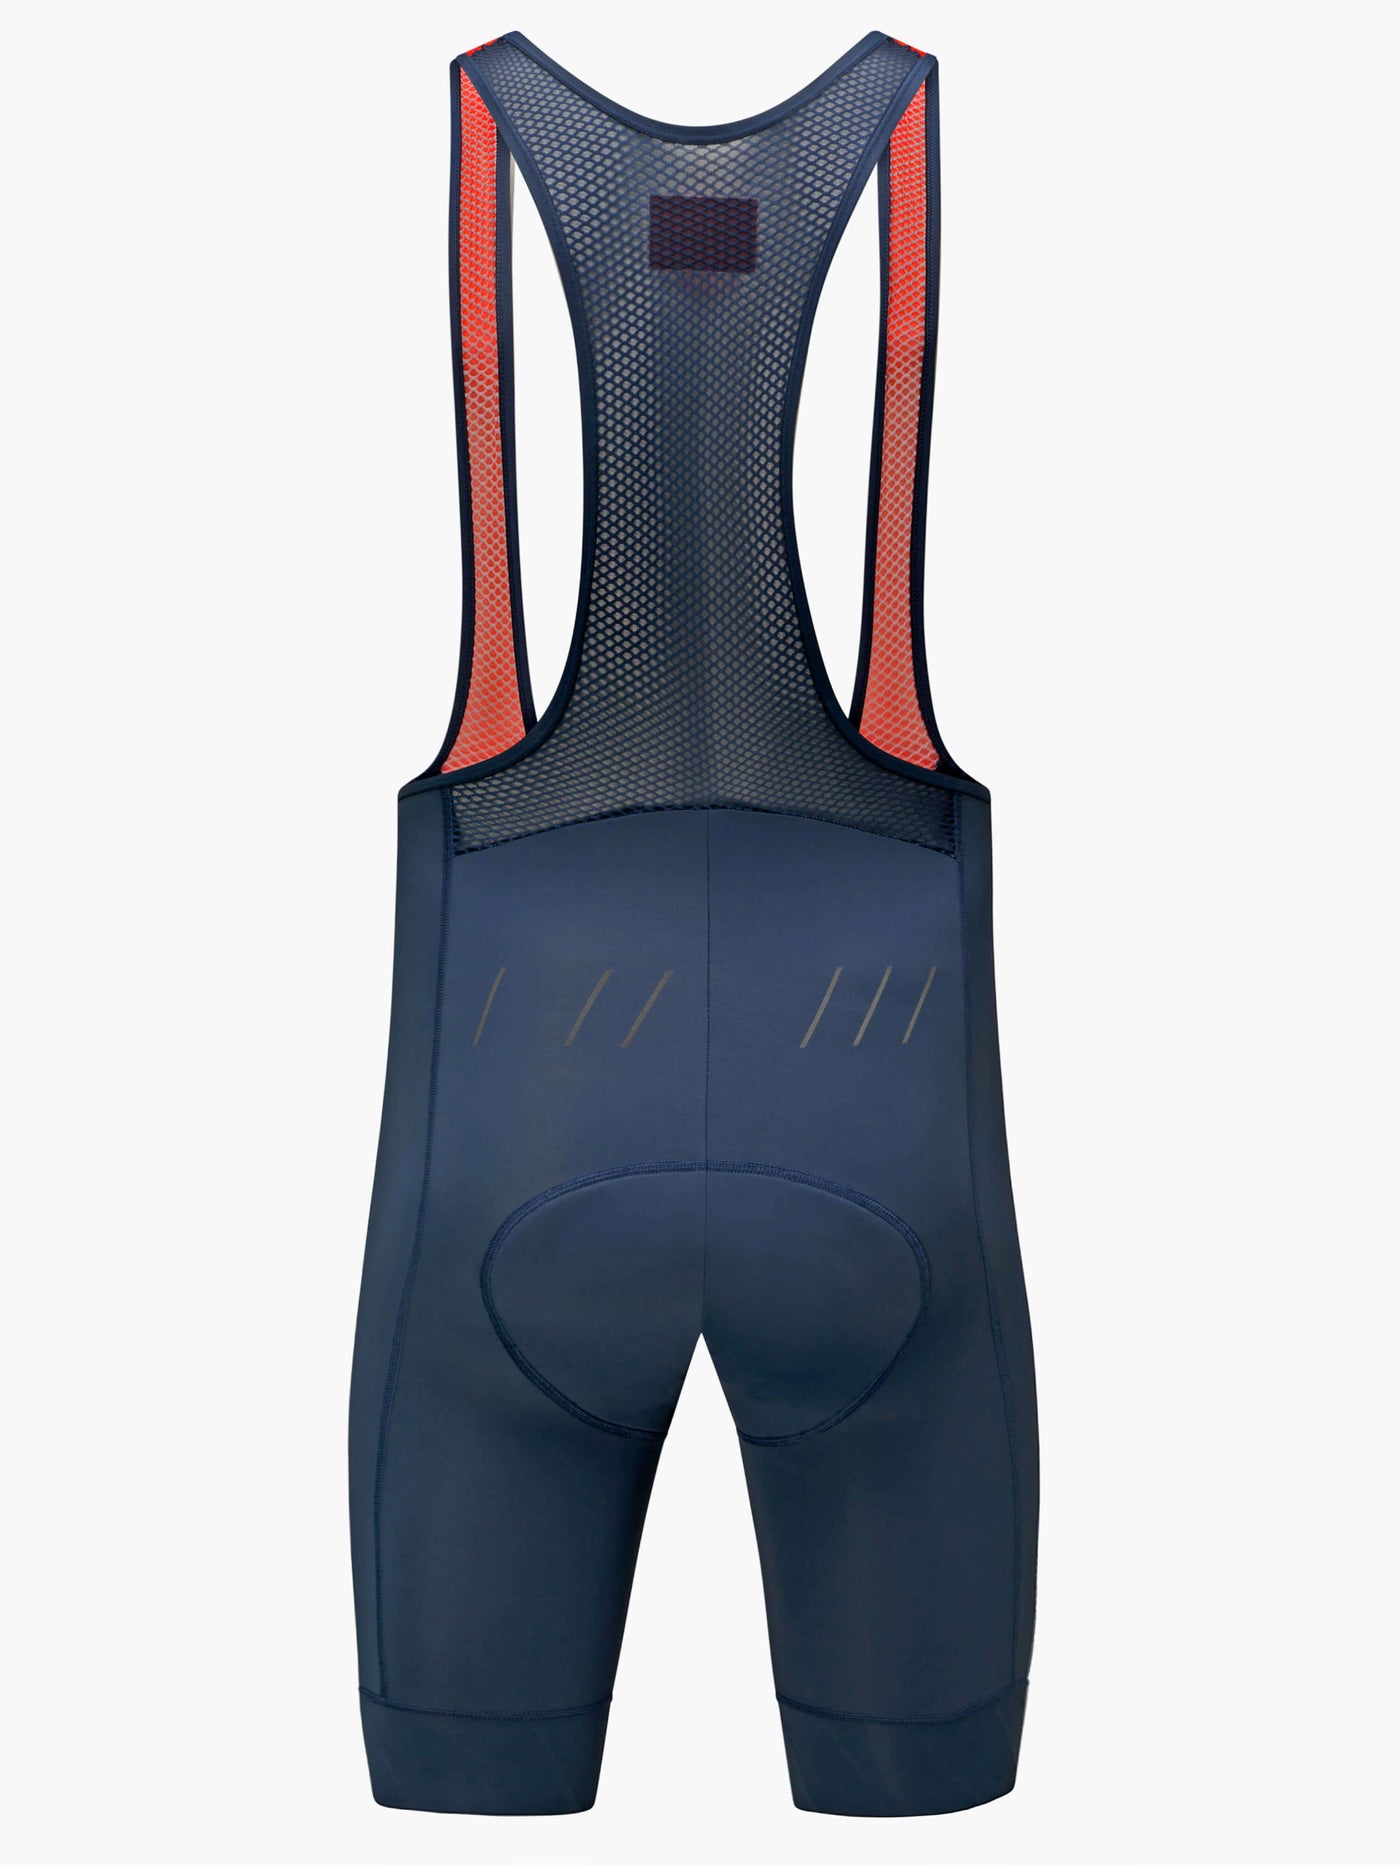 CHPT3 men's Grand Tour Bib shorts, in Outer space Blue viewed from back #color_outer-space-blue